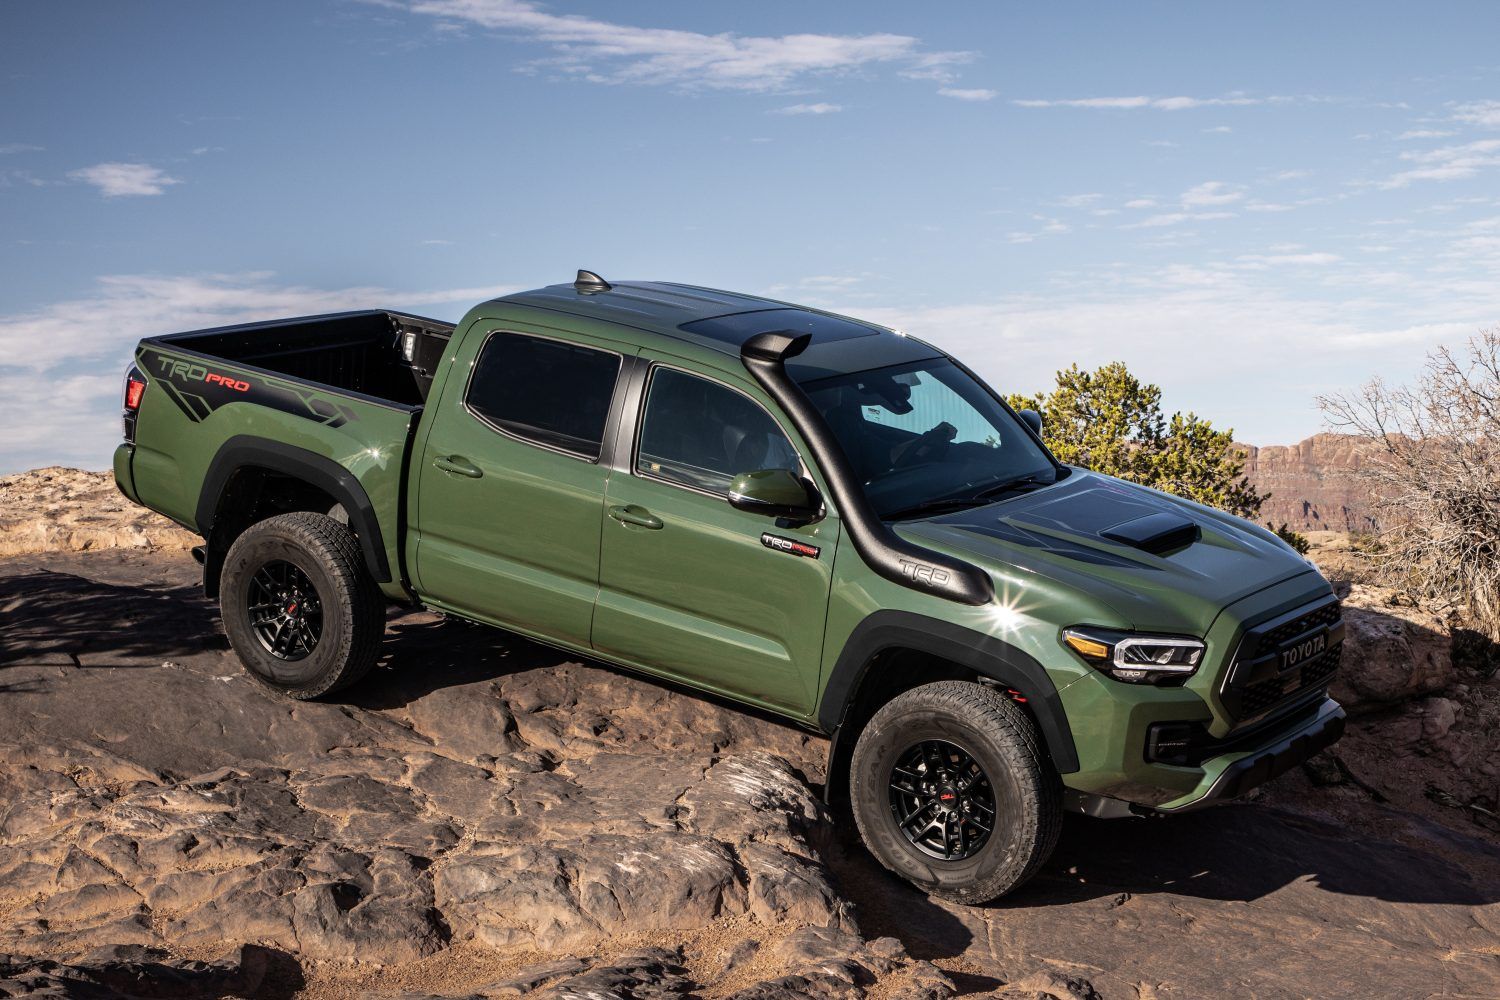 2020 Toyota Tacoma TRD Pro side view